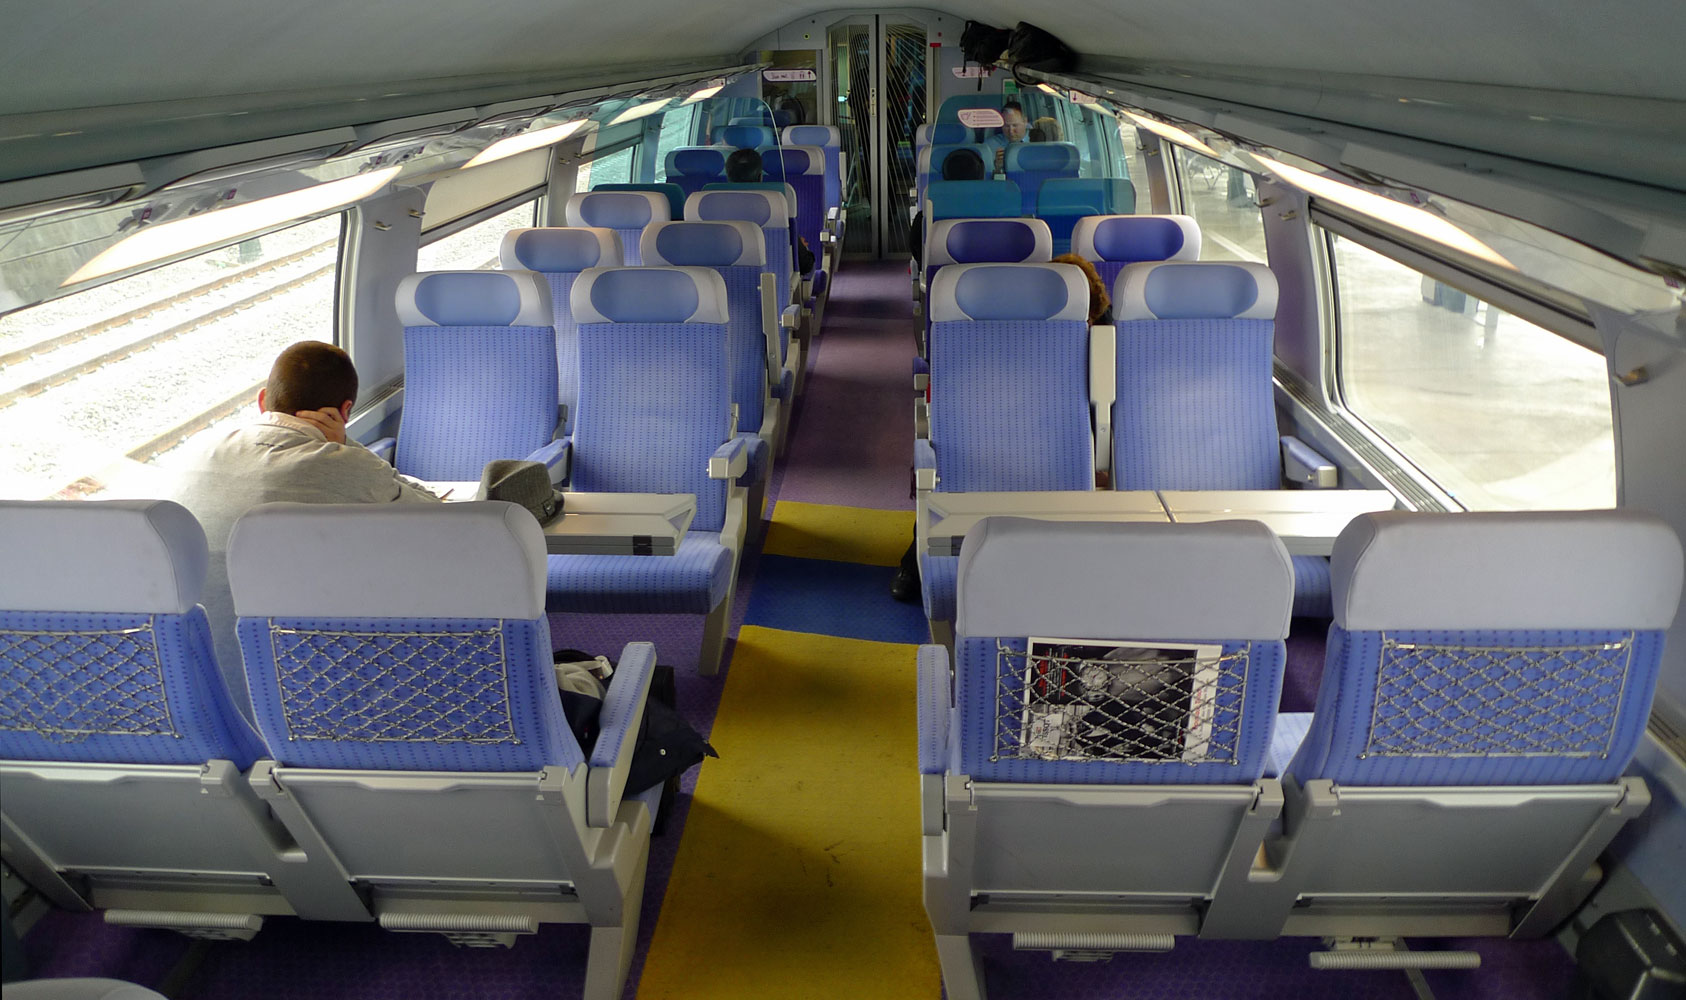 Traveling On the TGV High Speed Train in France - Wanderful World of Travel